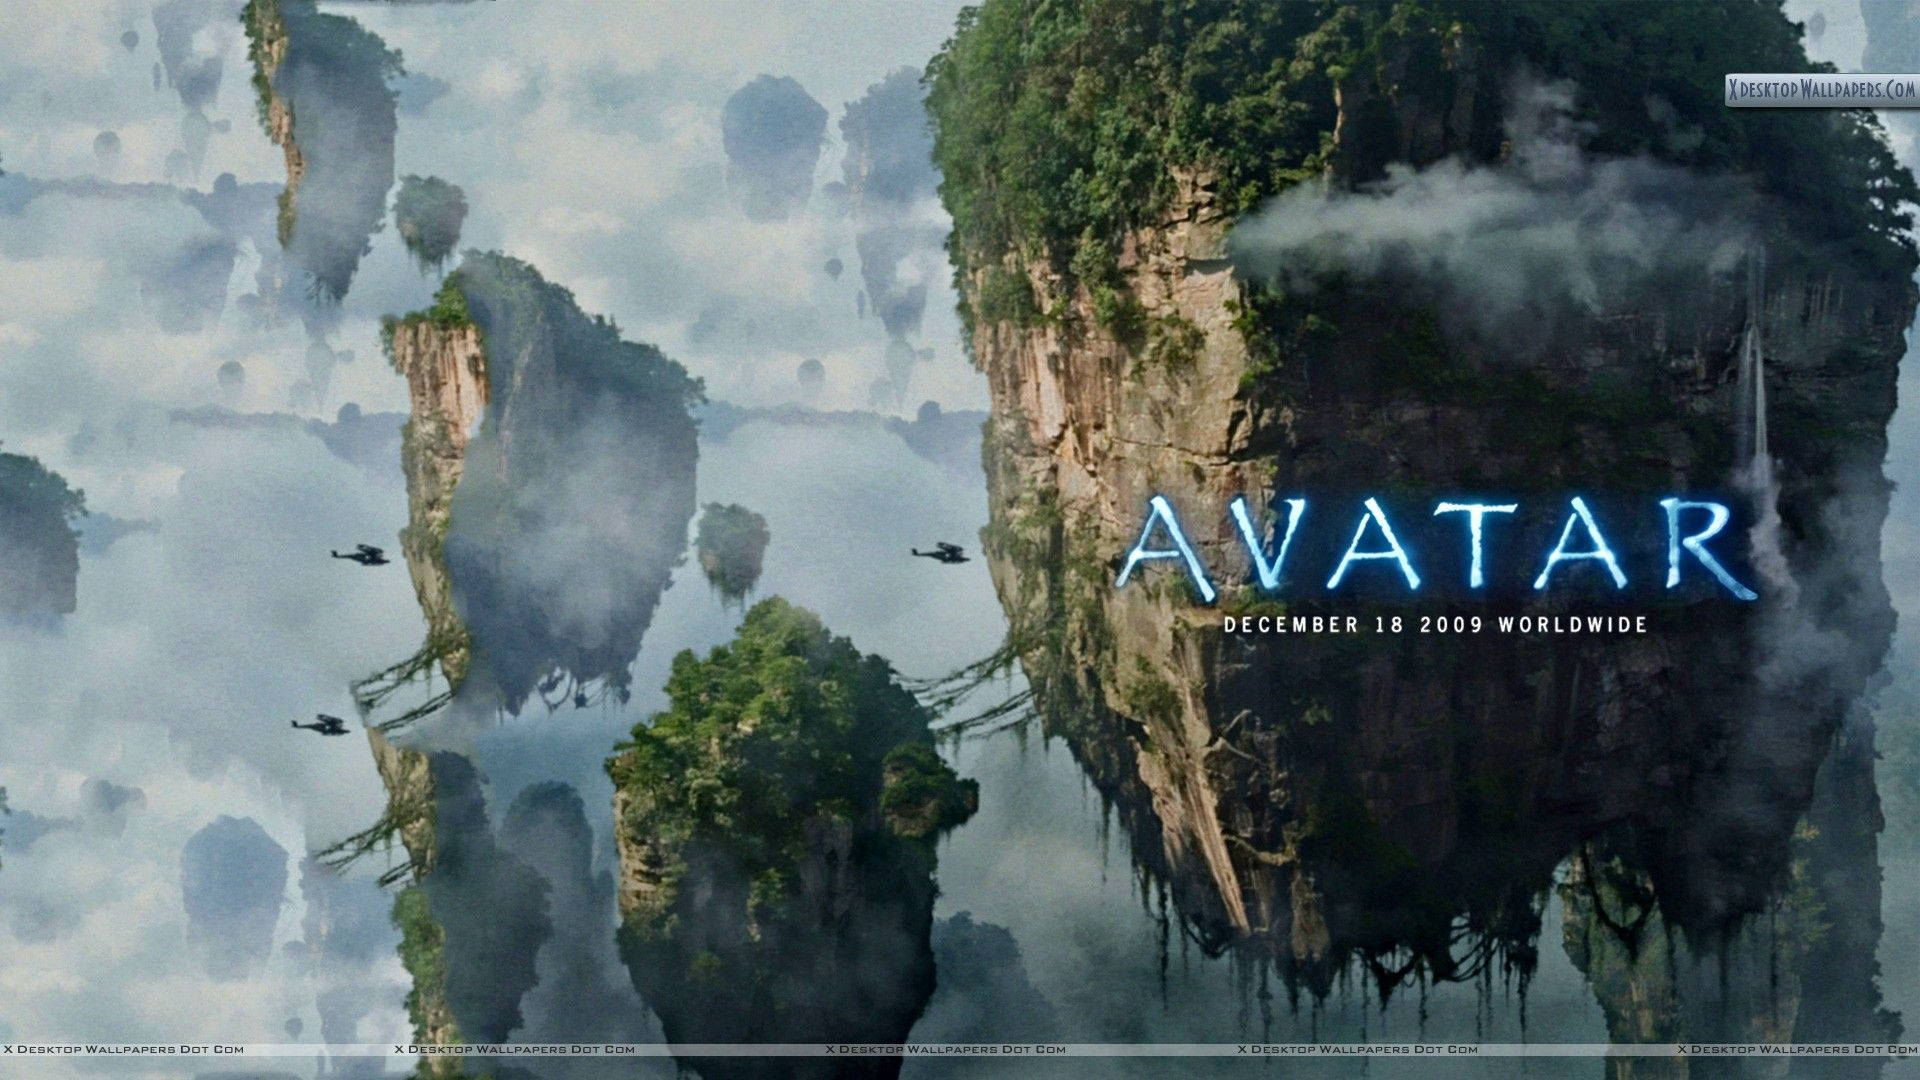 Avatar Movie Poster With Floating Island